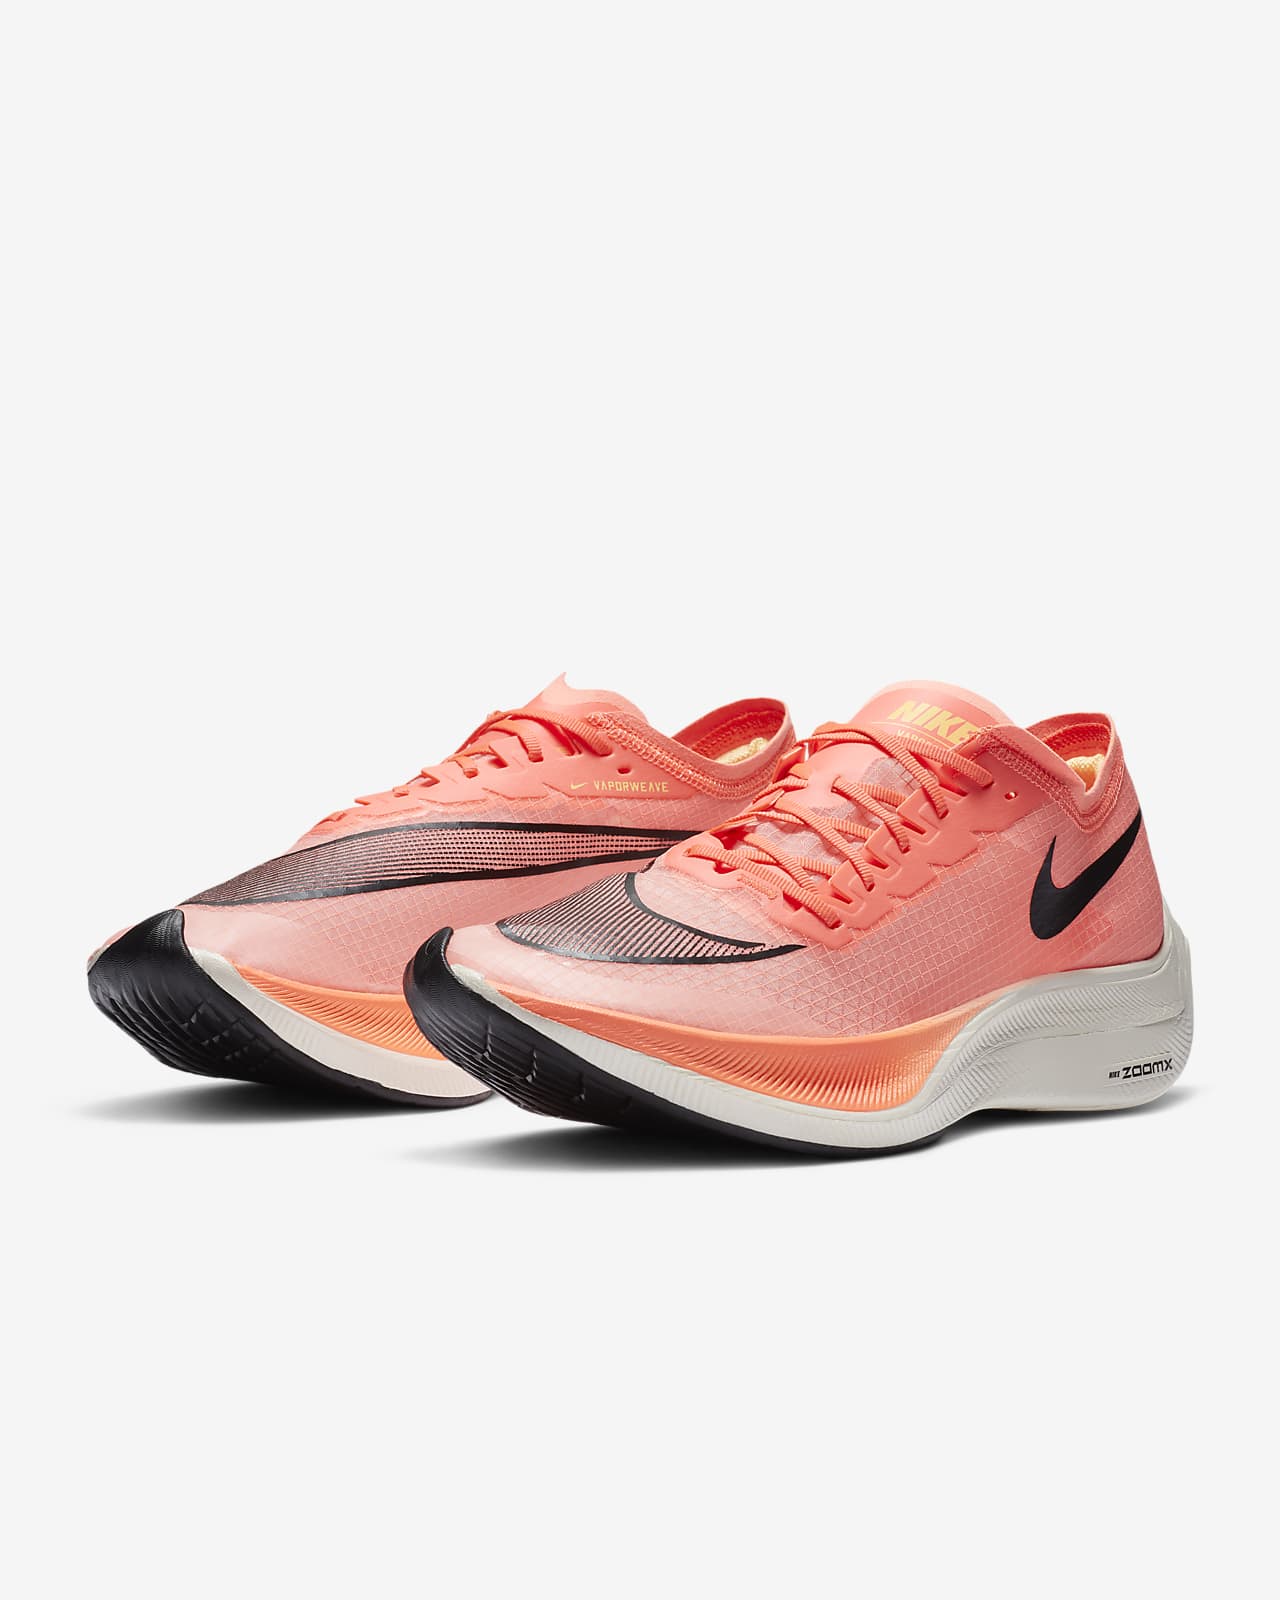 running shoes nike zoomx vaporfly next